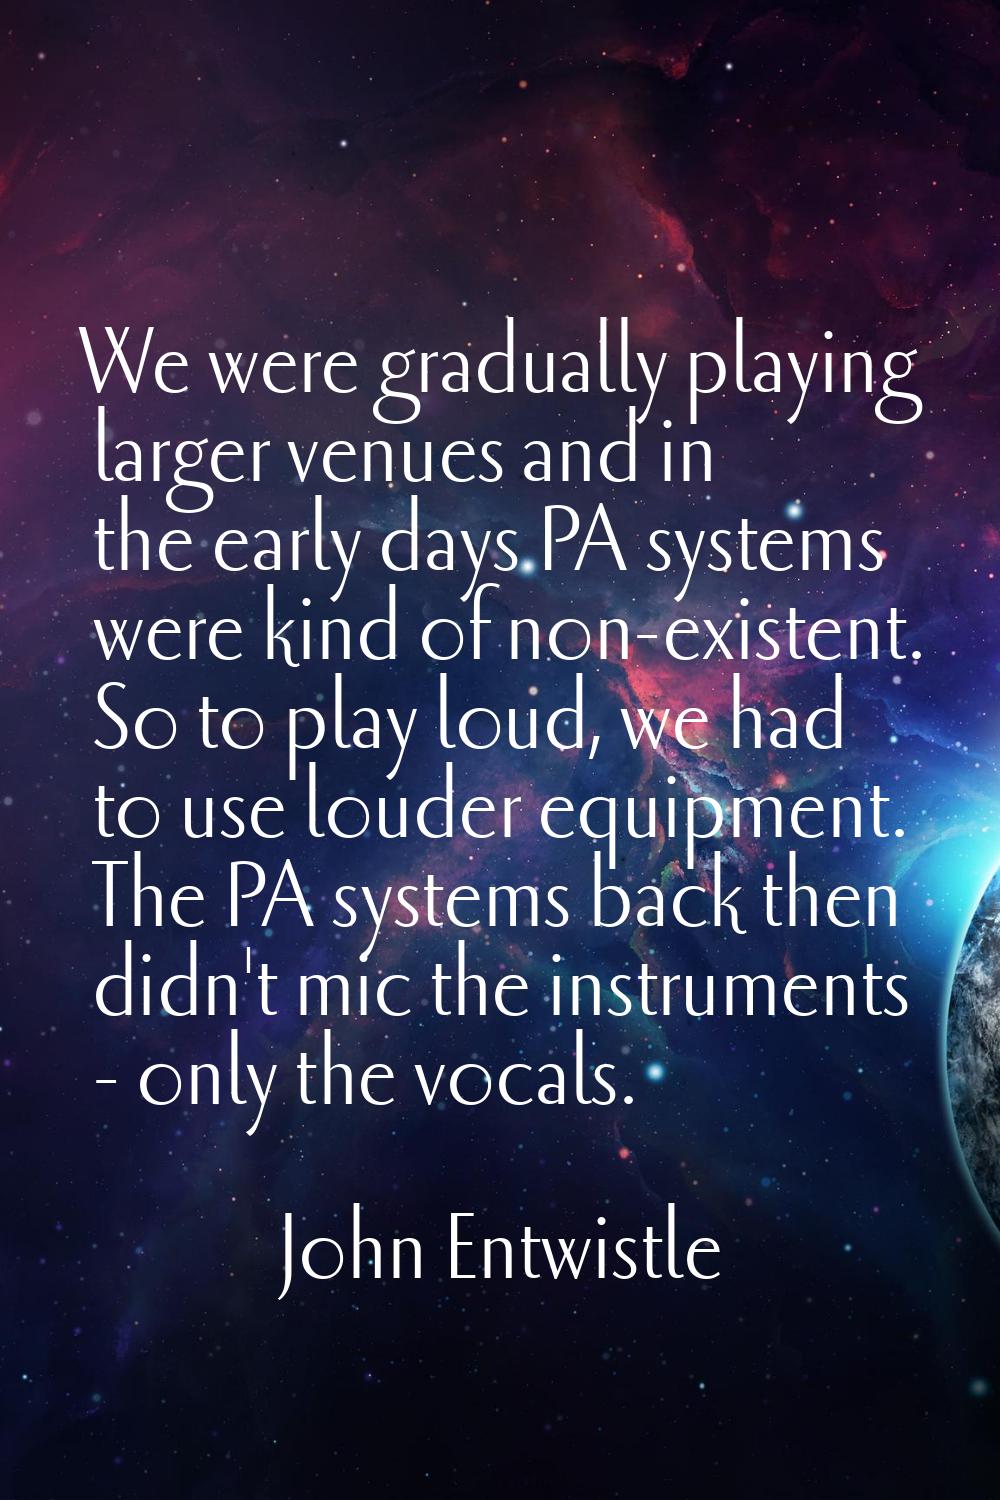 We were gradually playing larger venues and in the early days PA systems were kind of non-existent.